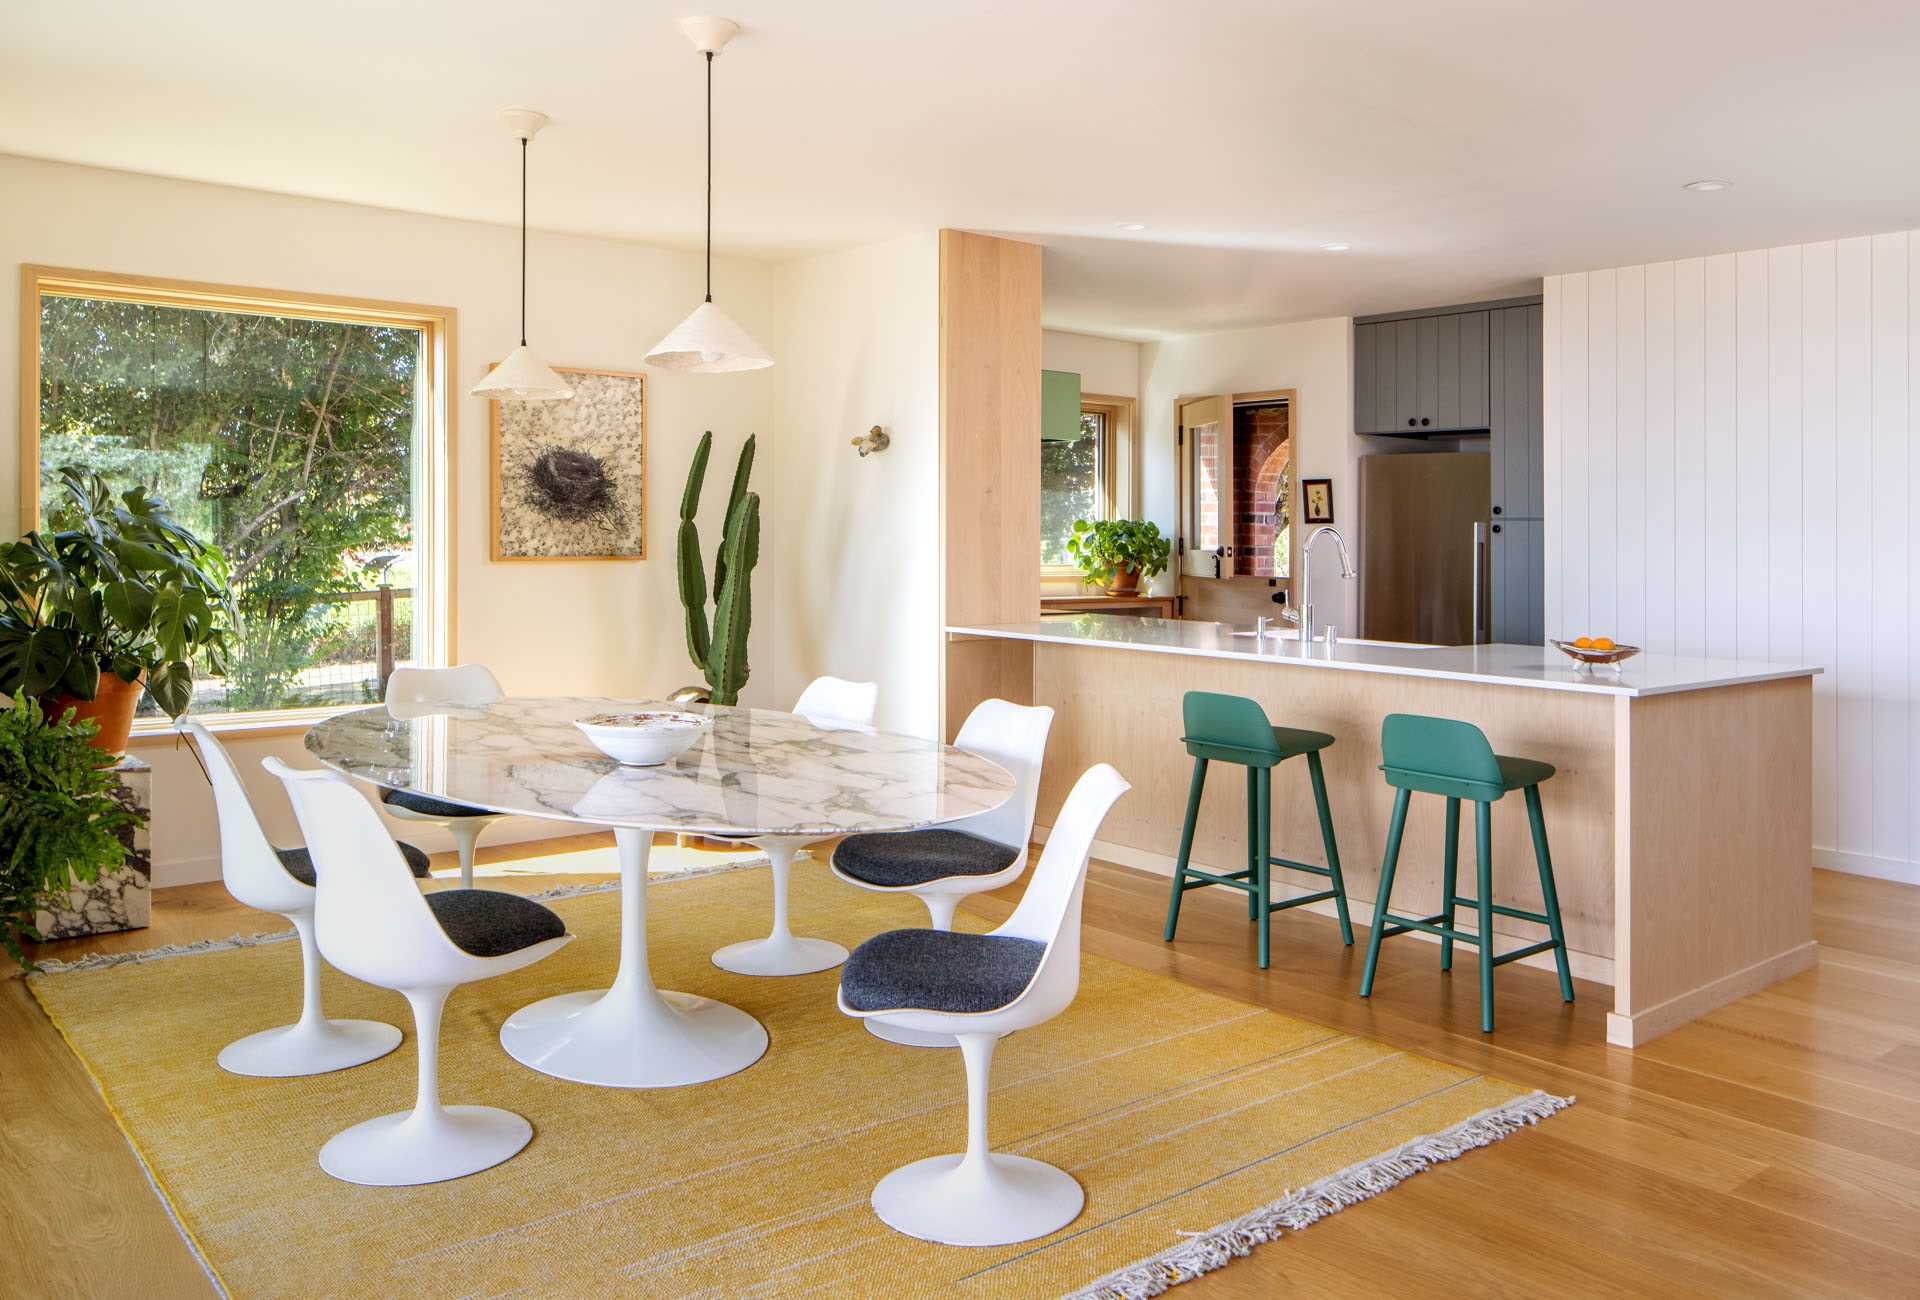 A contemporary remodeled interior with an open-plan dining area and a new kitchen.